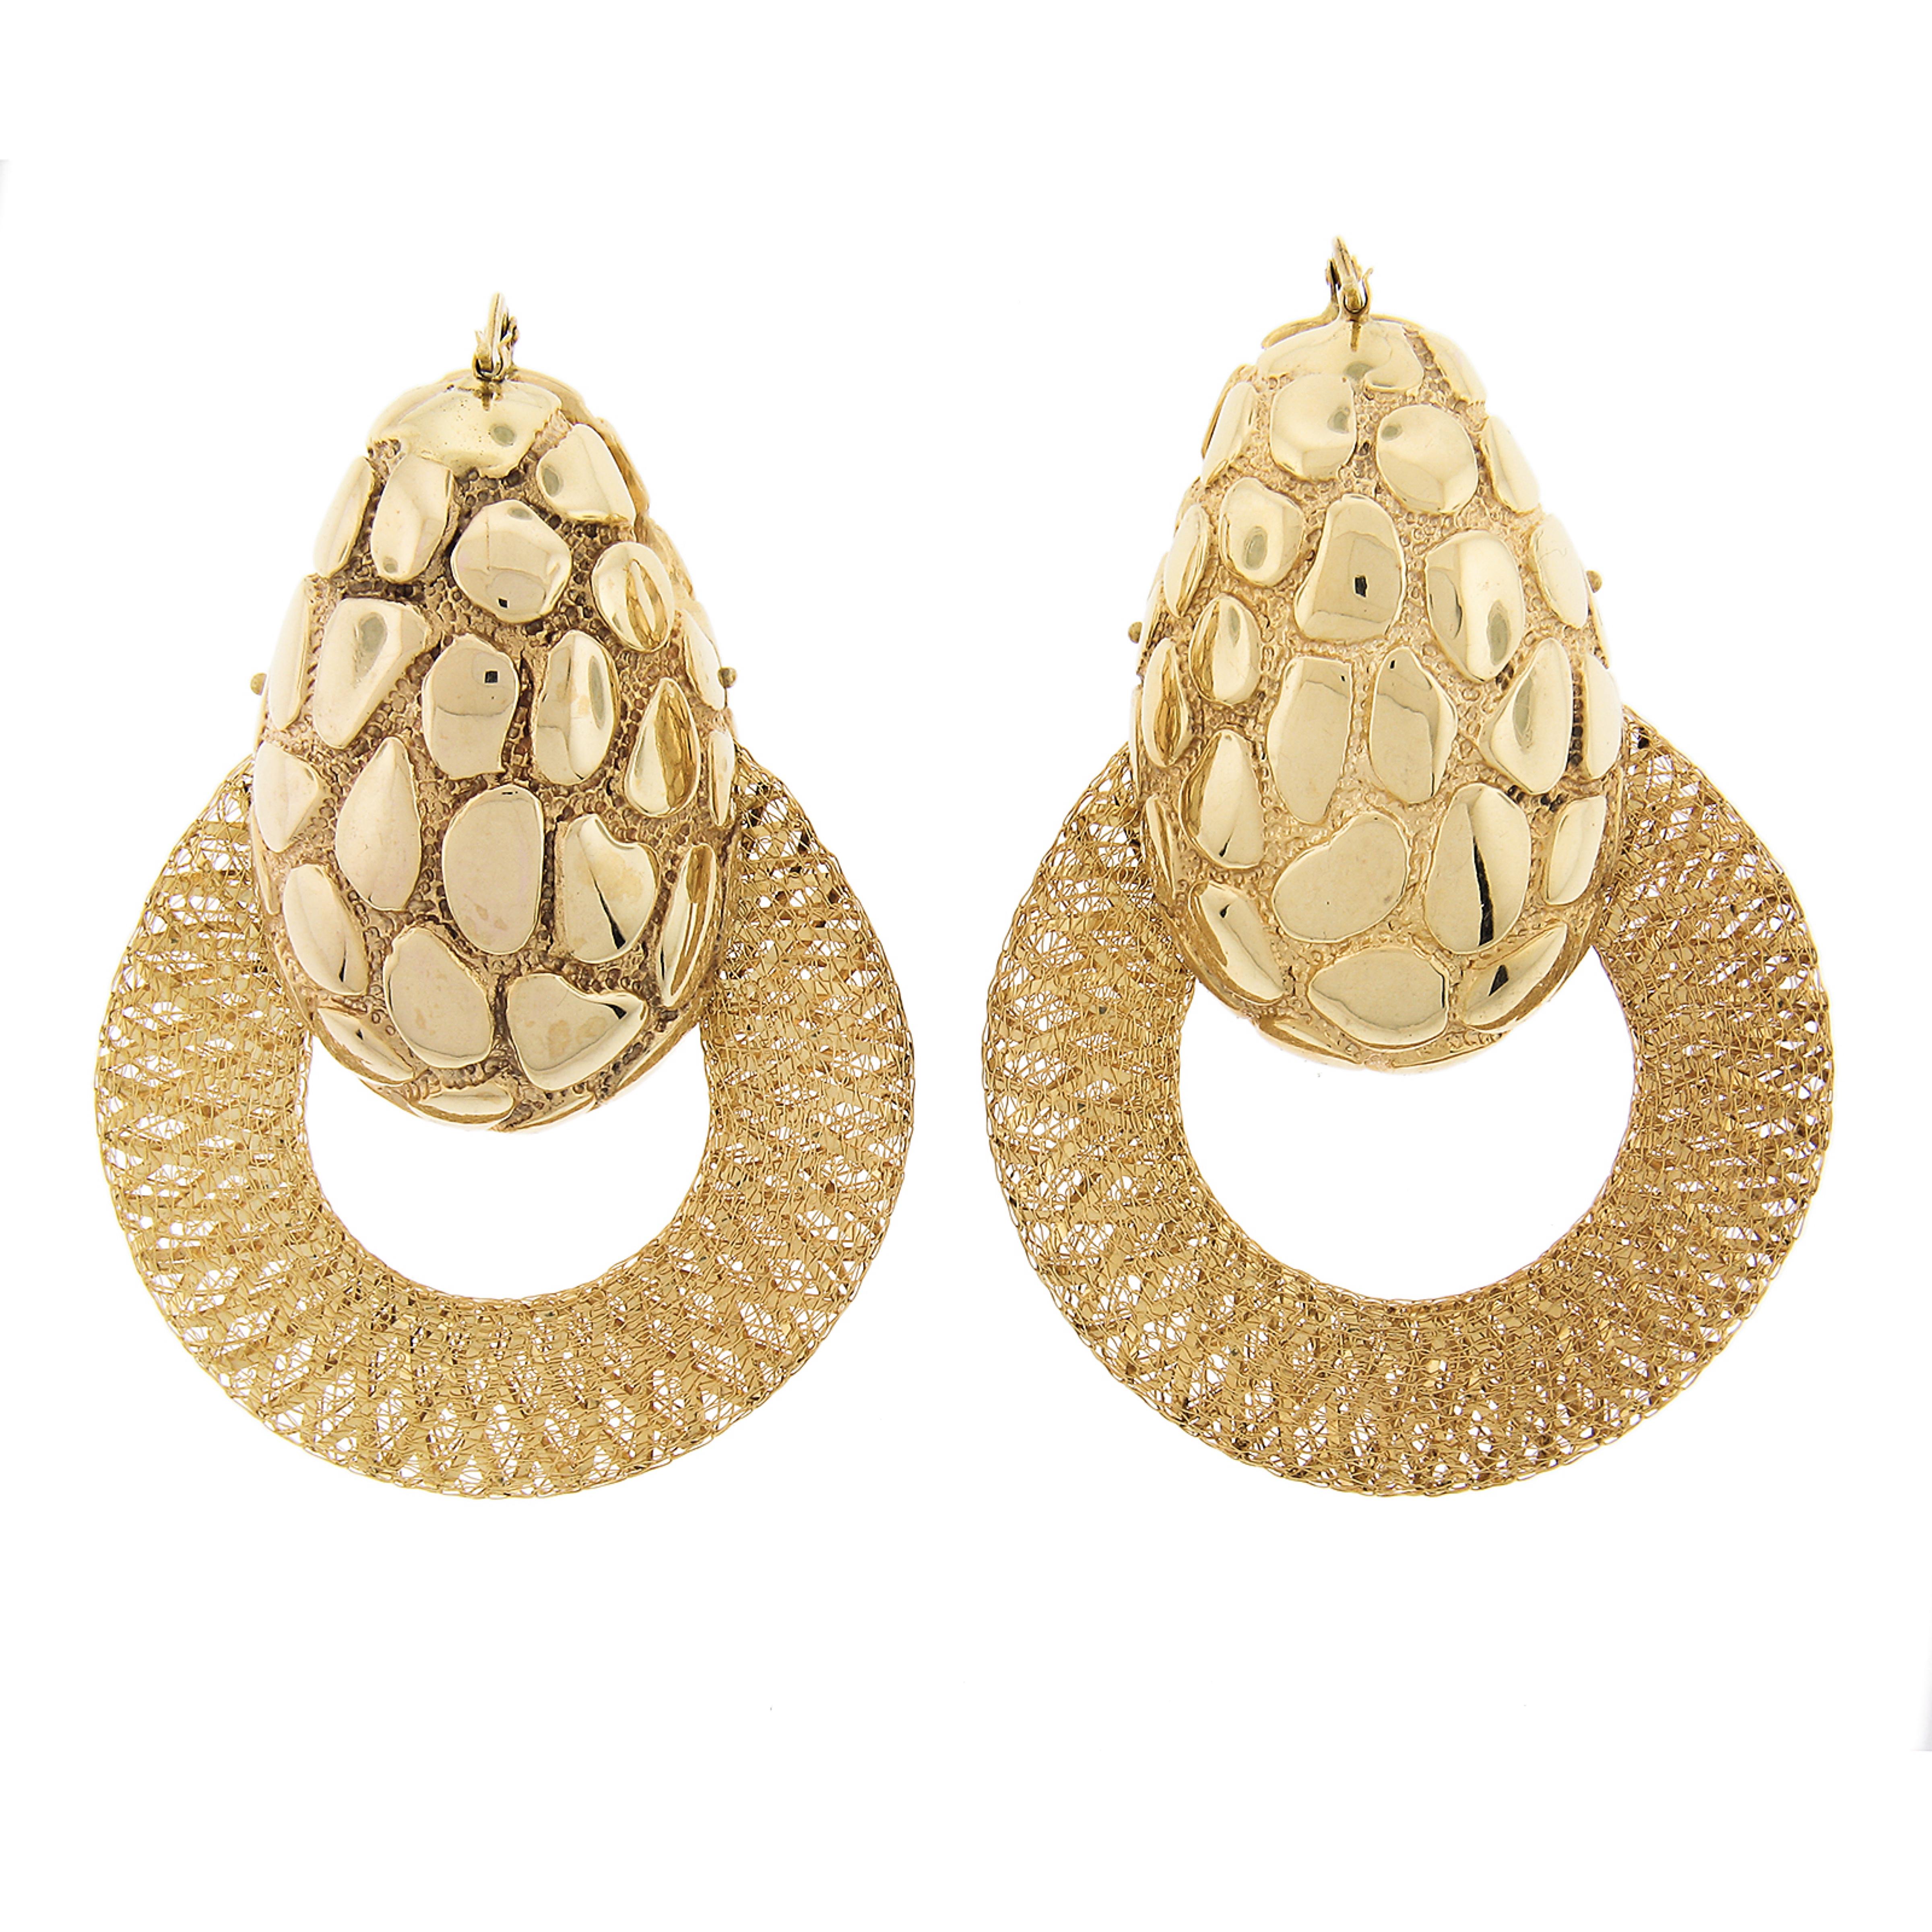 Material: 18K Solid Yellow Gold
Weight: 19.79 Grams
Backing: Snap Closures (pierced ears required)
Overall Width: 44.4 mm (1.7